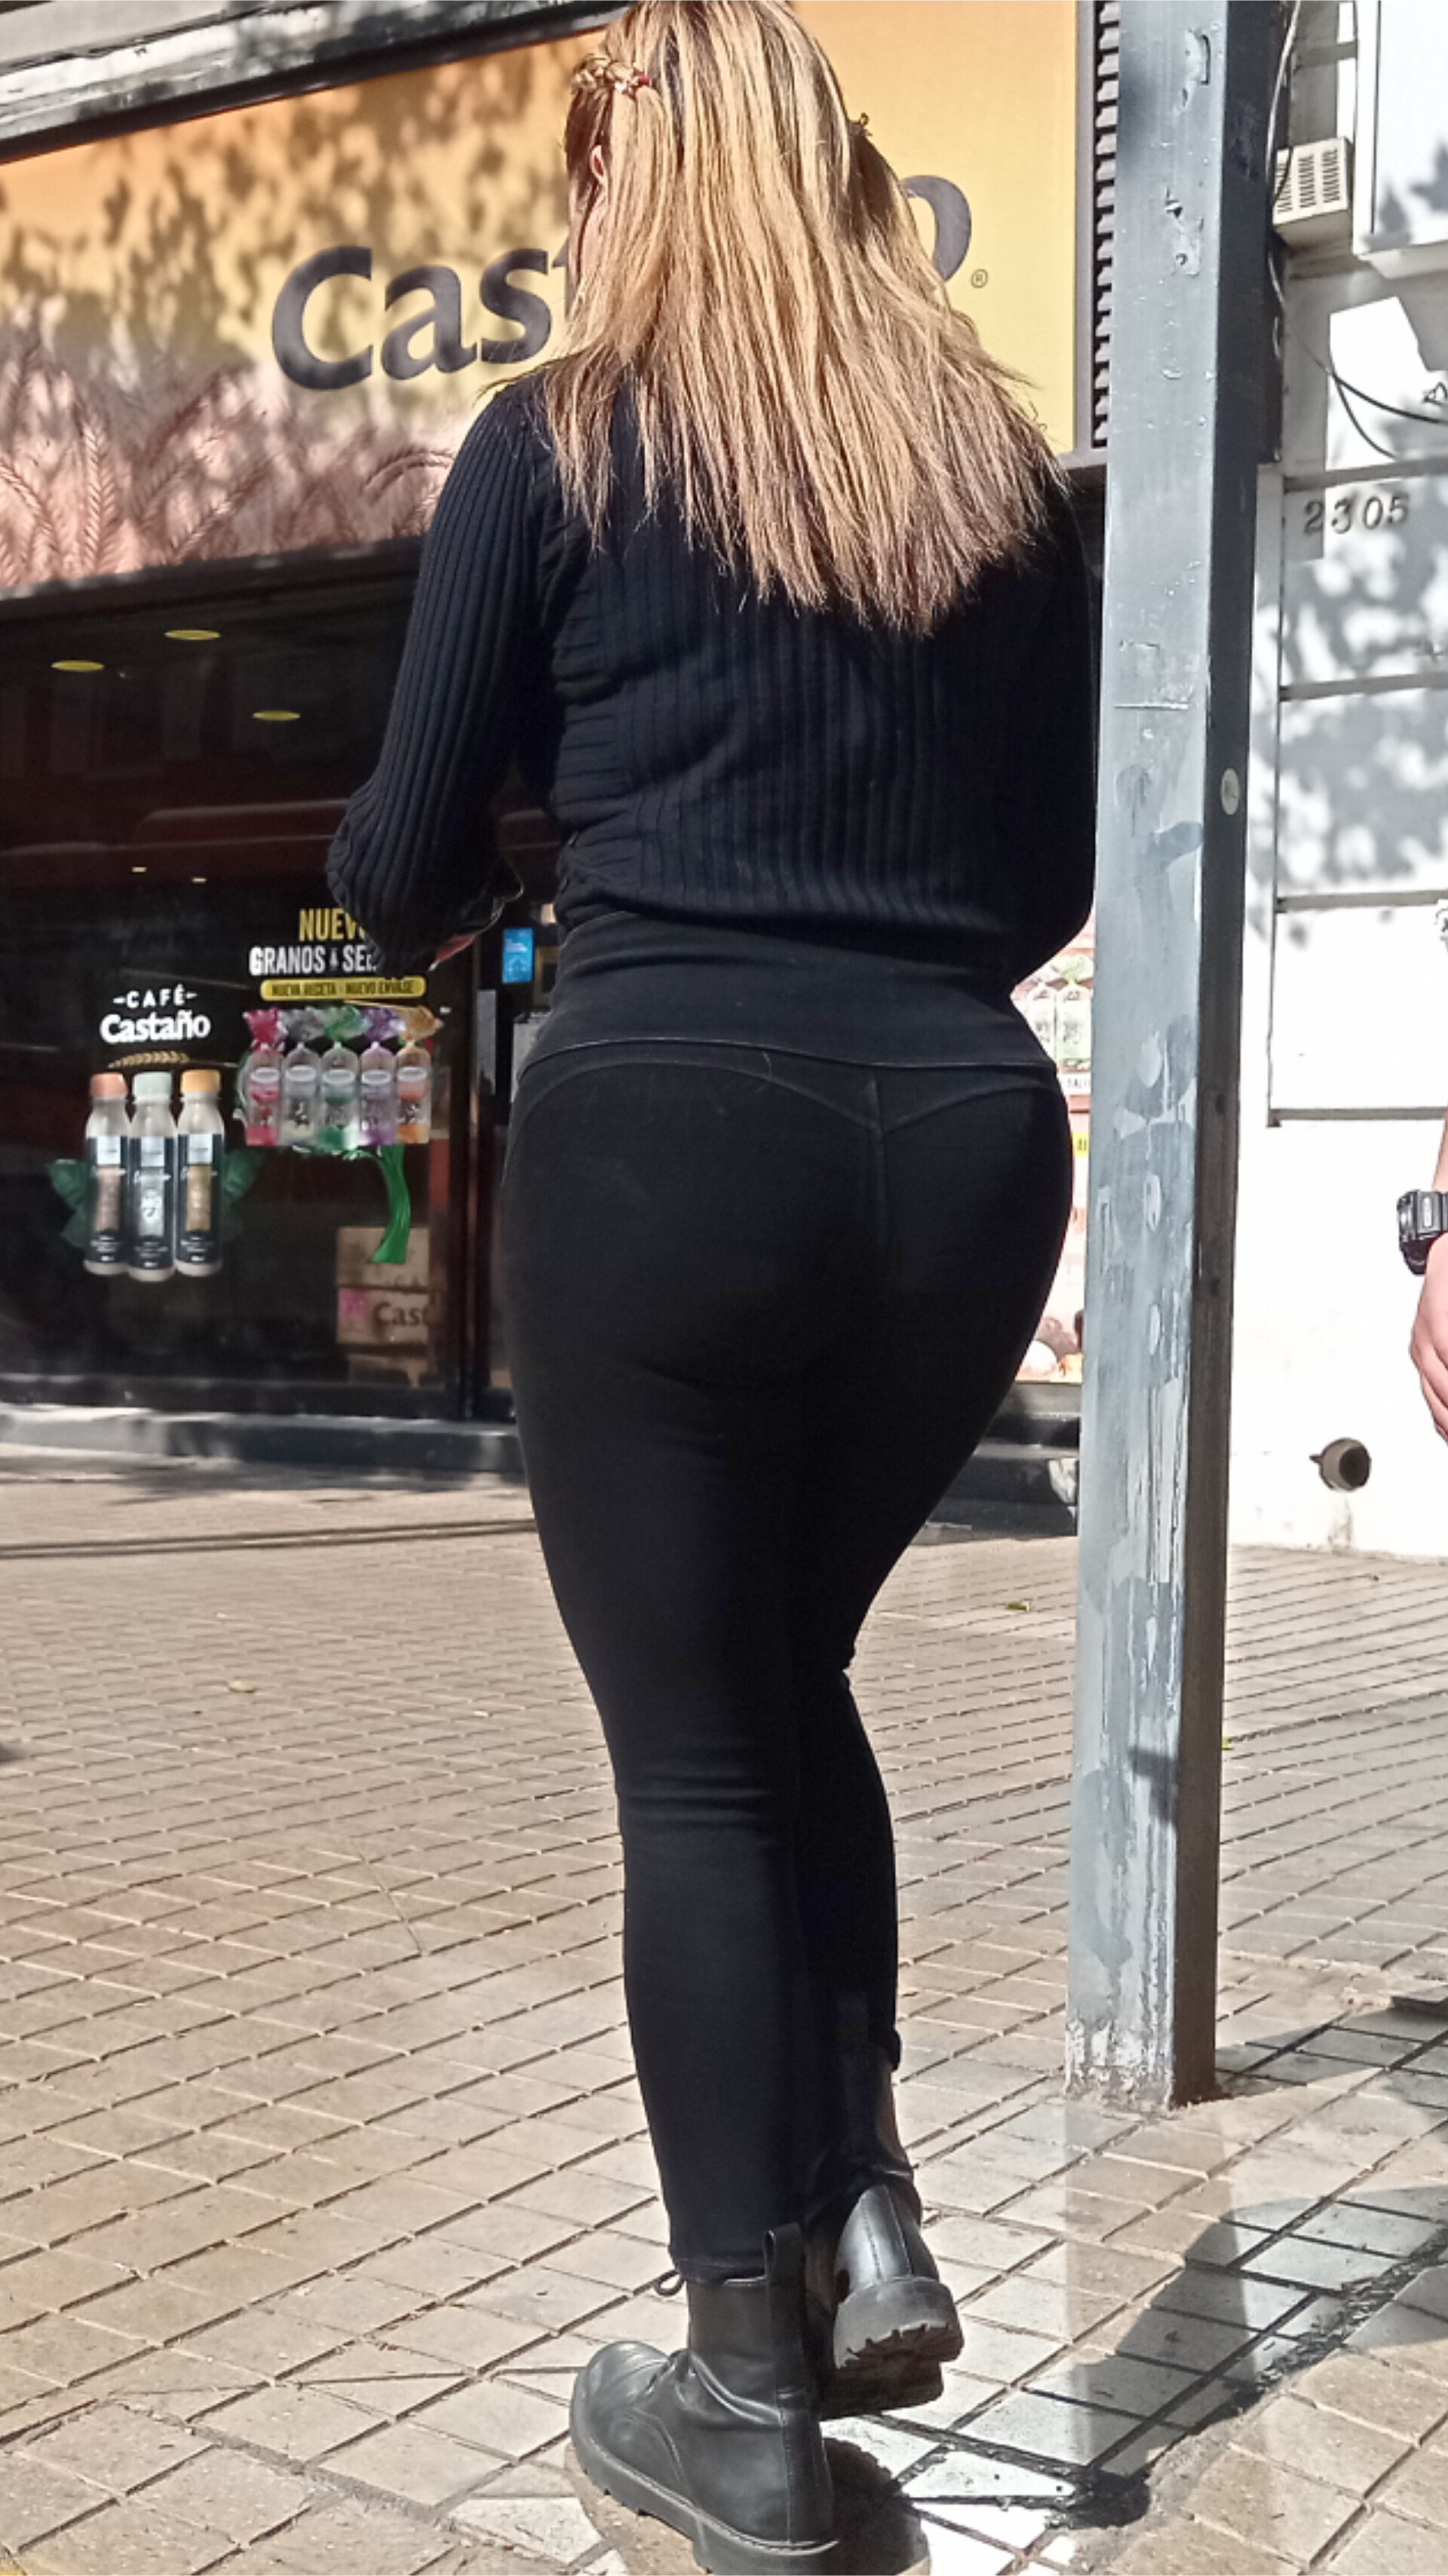 Rubia Culona Perfect Bubble Butt in Black Leggings, or jeans? what do ...